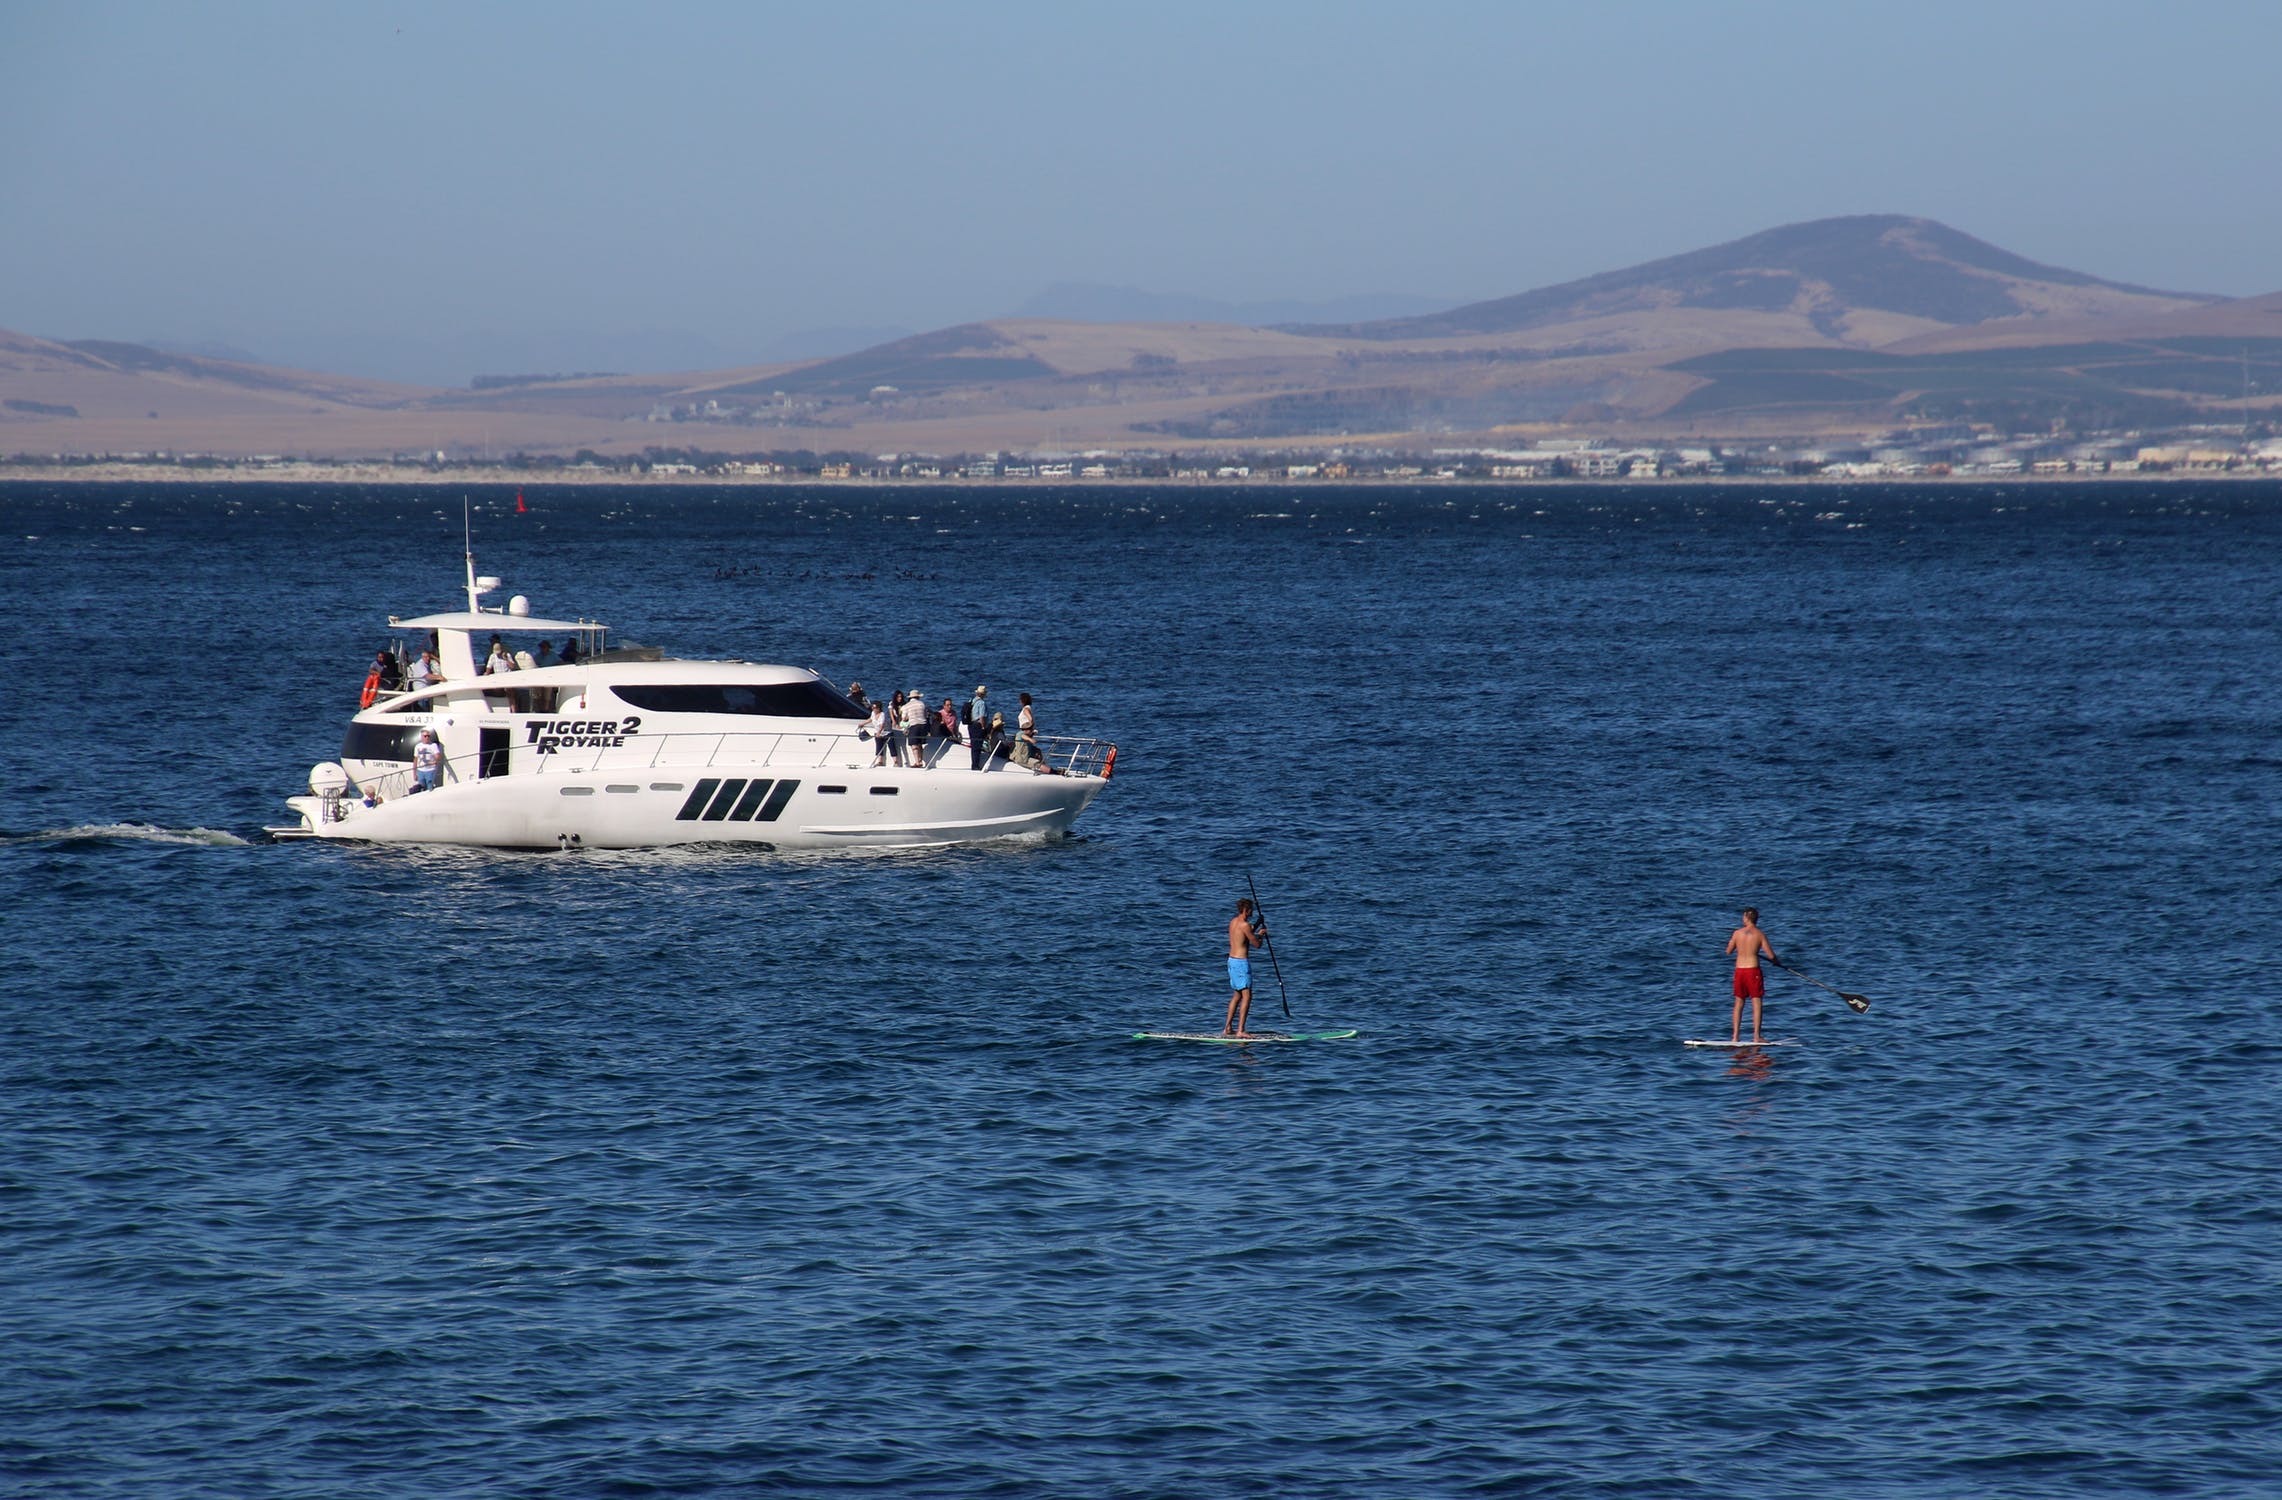 Surfers near the yacht at the sea photo